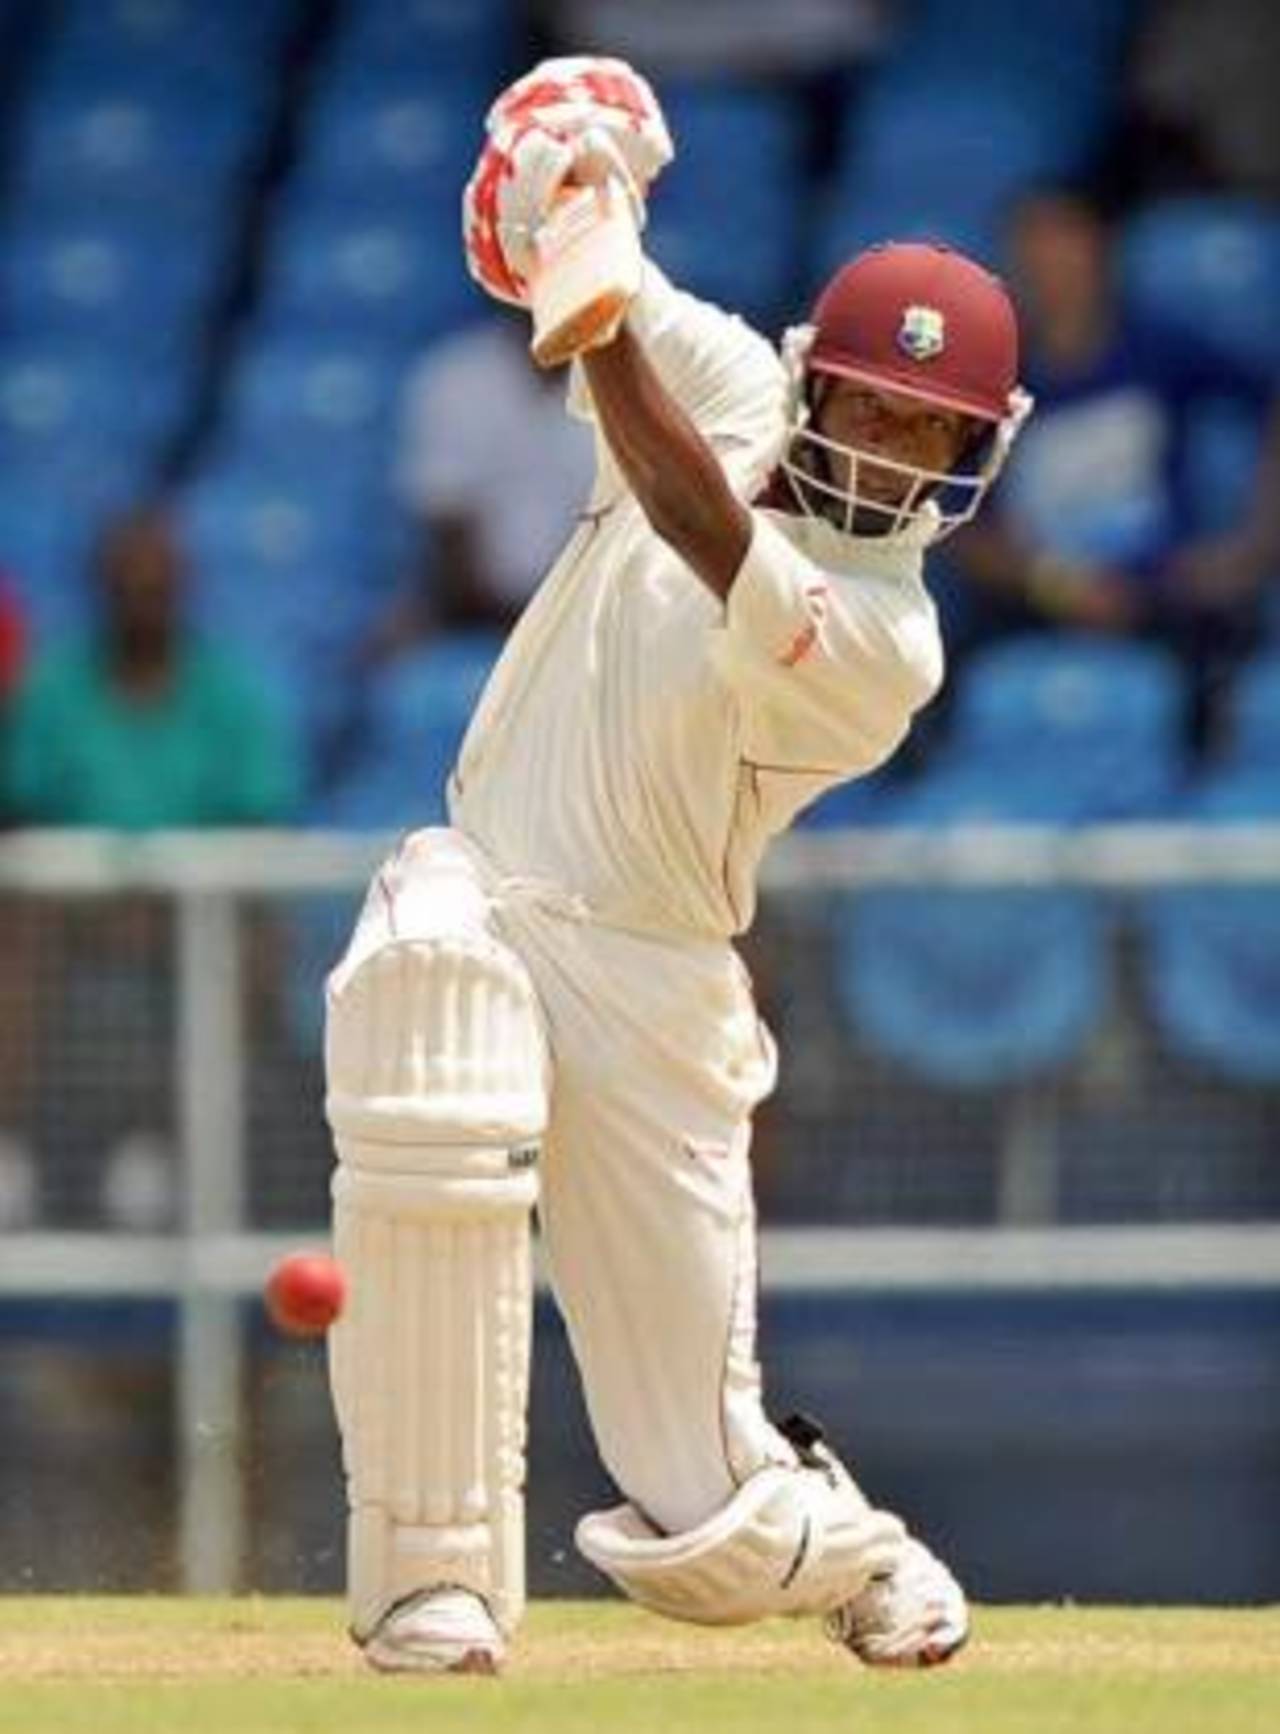 Omar Phillips' solid knock helped lay a strong foundation for a substantial lead before Bangladesh hit back&nbsp;&nbsp;&bull;&nbsp;&nbsp;AFP